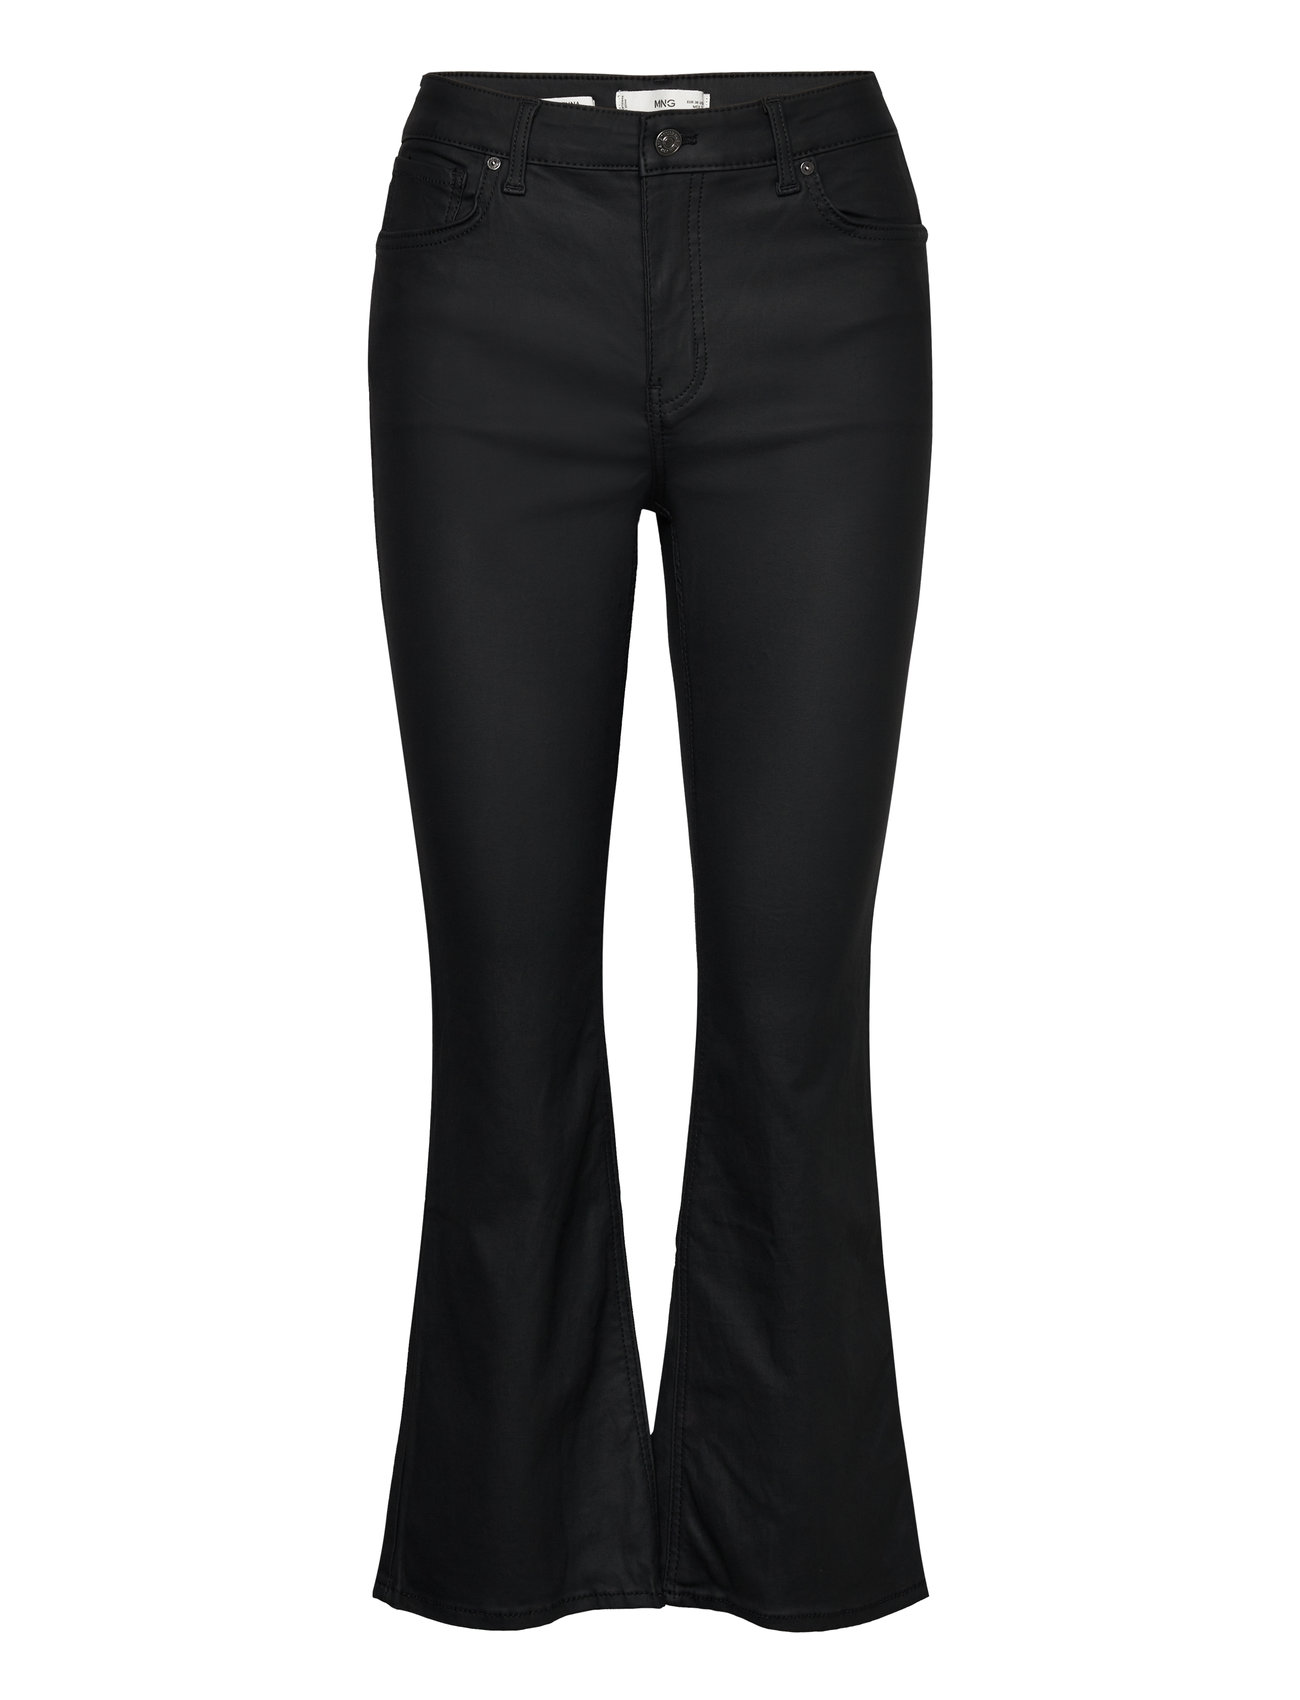 Sienna Flare Crop Waxed Jeans Bottoms Jeans Flares Black Mango